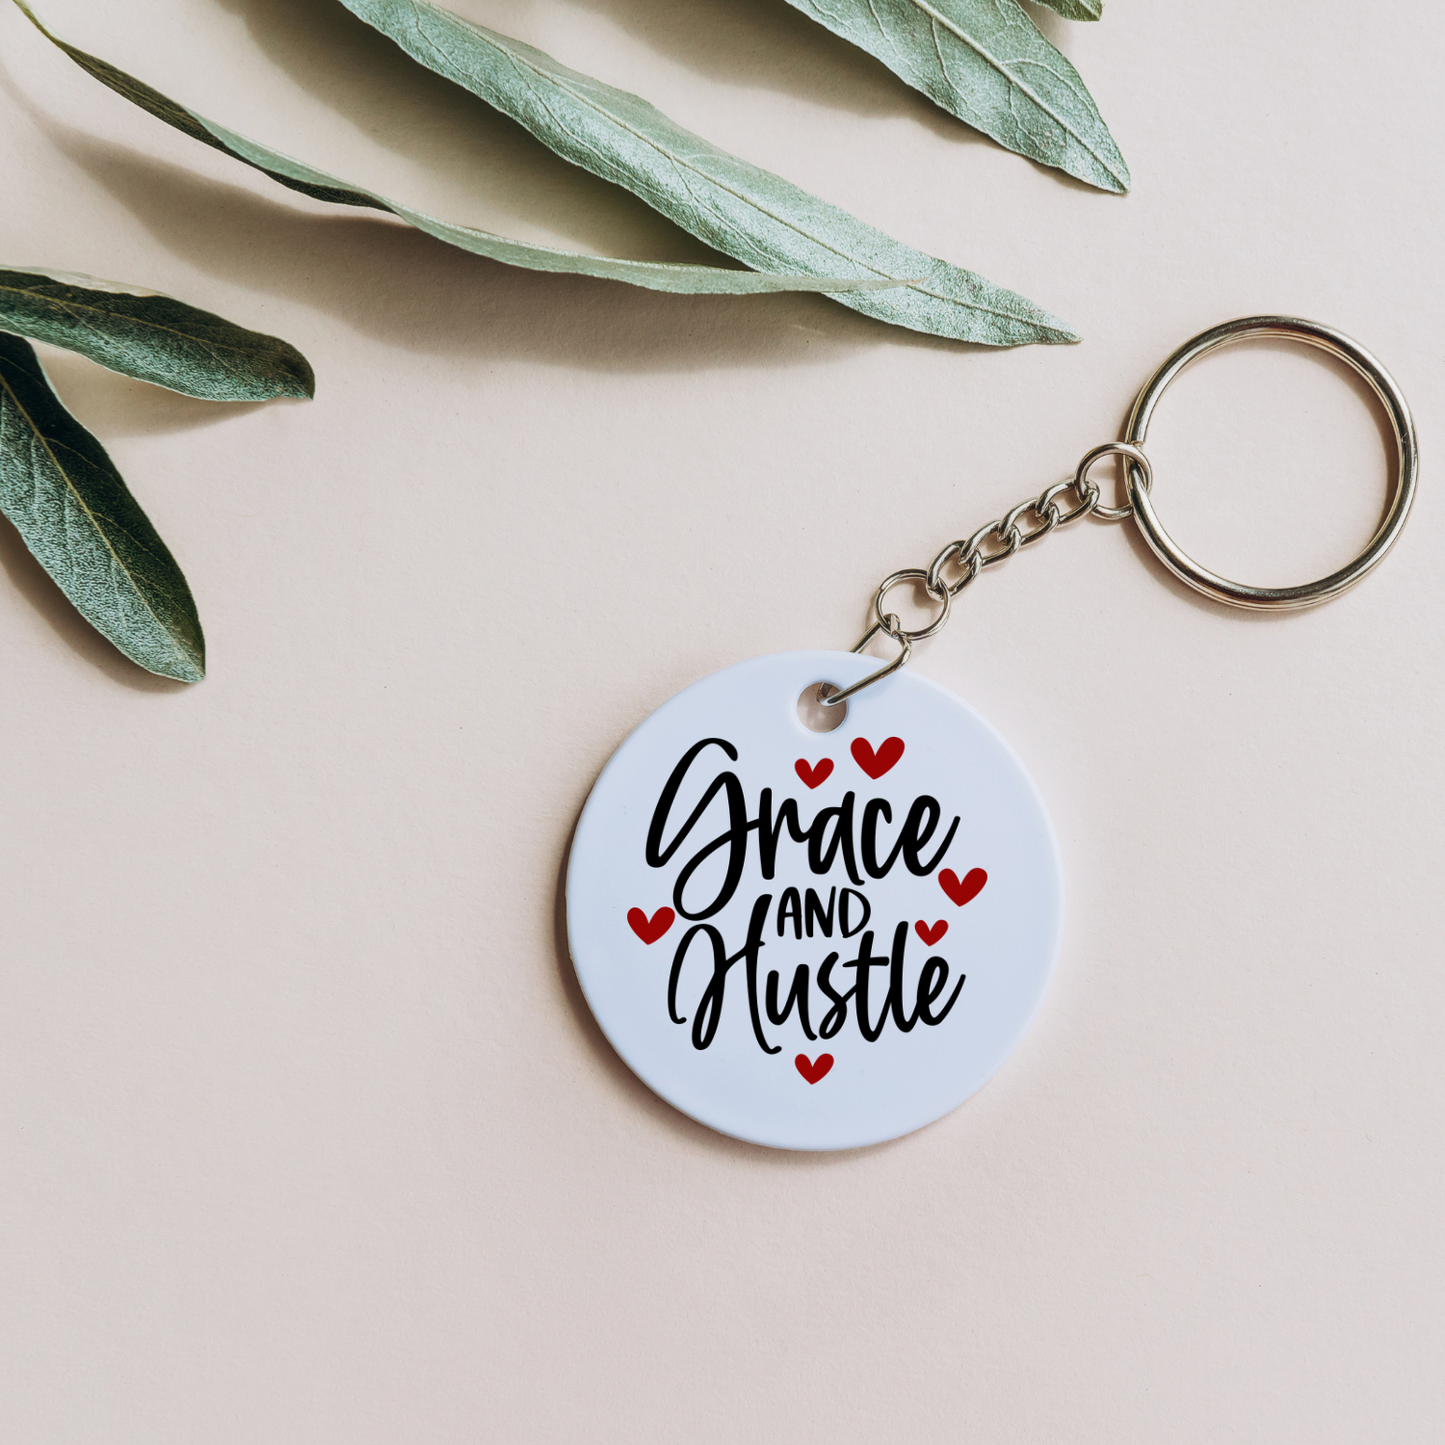 Grace and Hustle -Keychain UVDTF decals